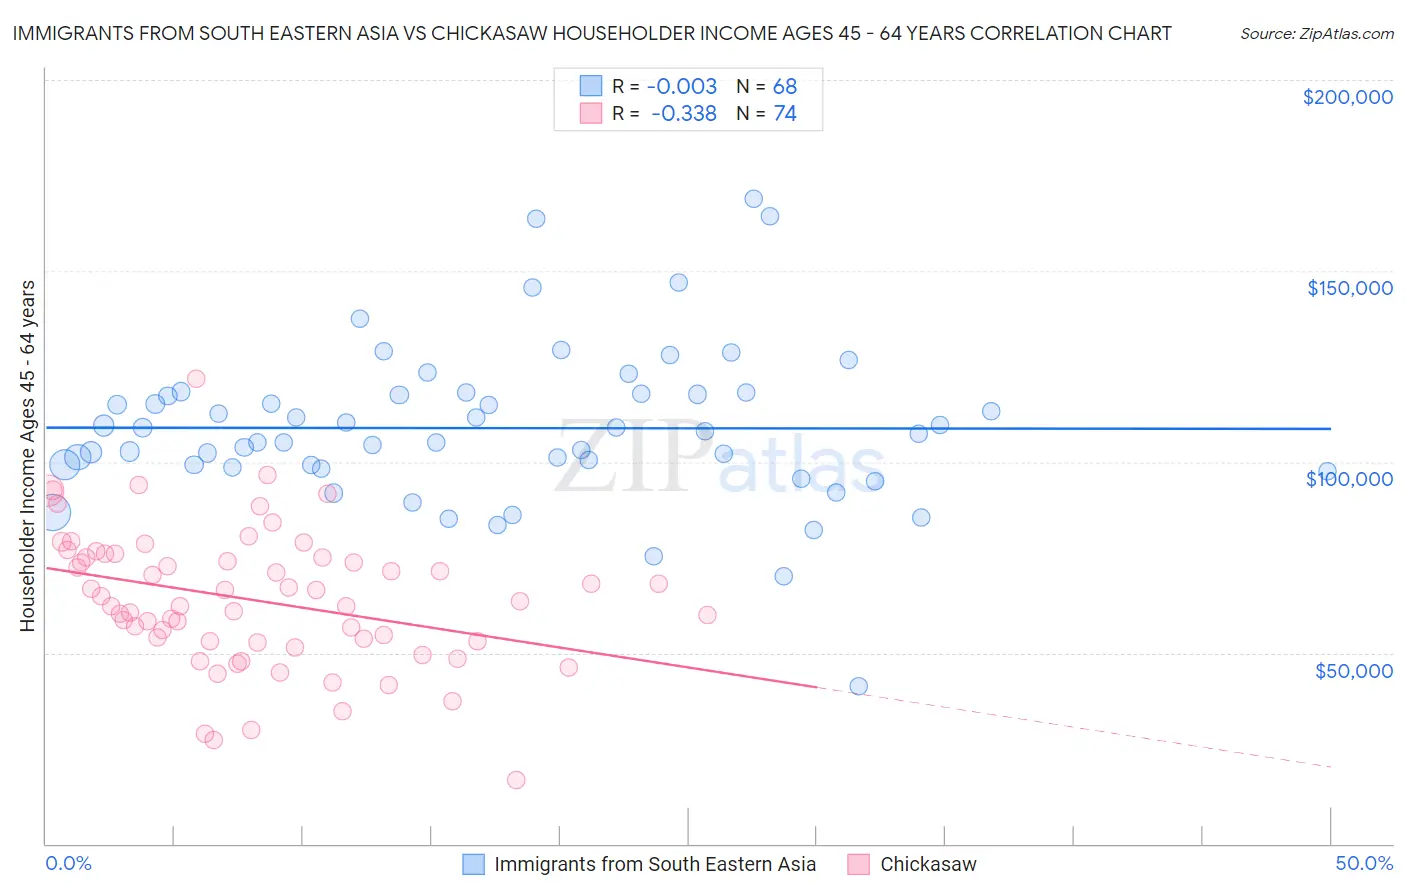 Immigrants from South Eastern Asia vs Chickasaw Householder Income Ages 45 - 64 years